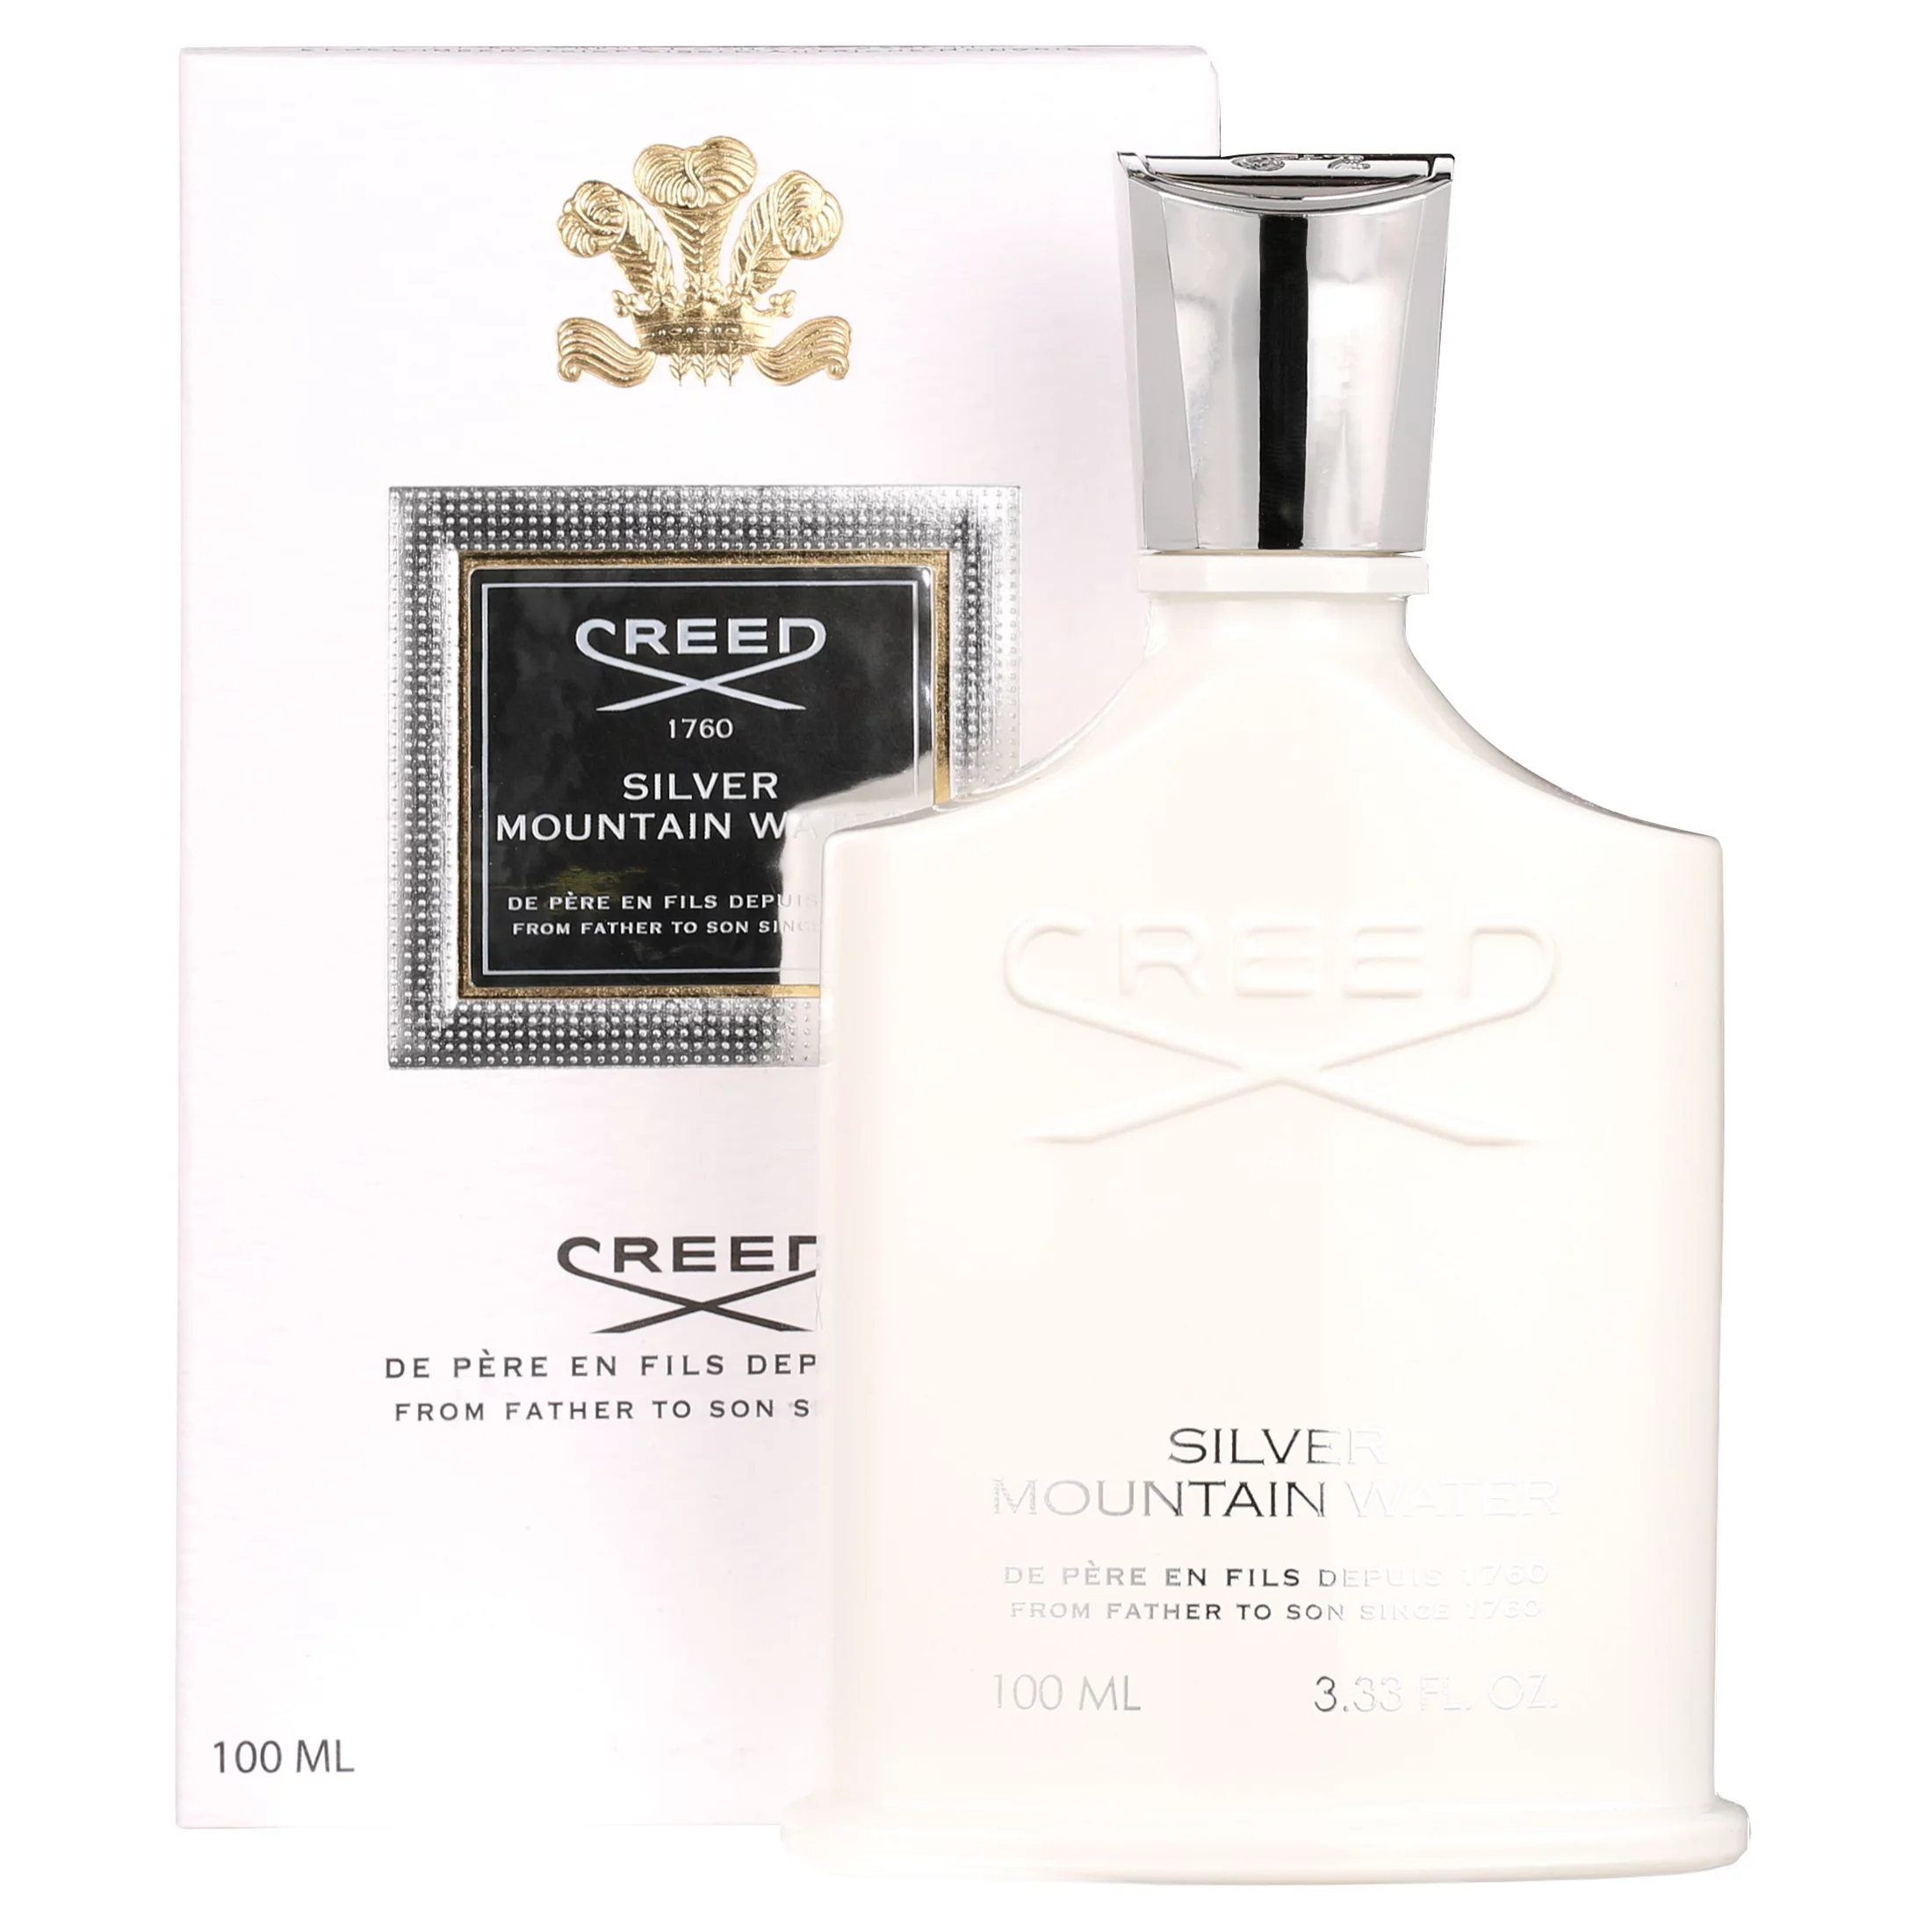 Perfume Creed Silver Mountain Water Hombre Mujer 100 ML Unisex